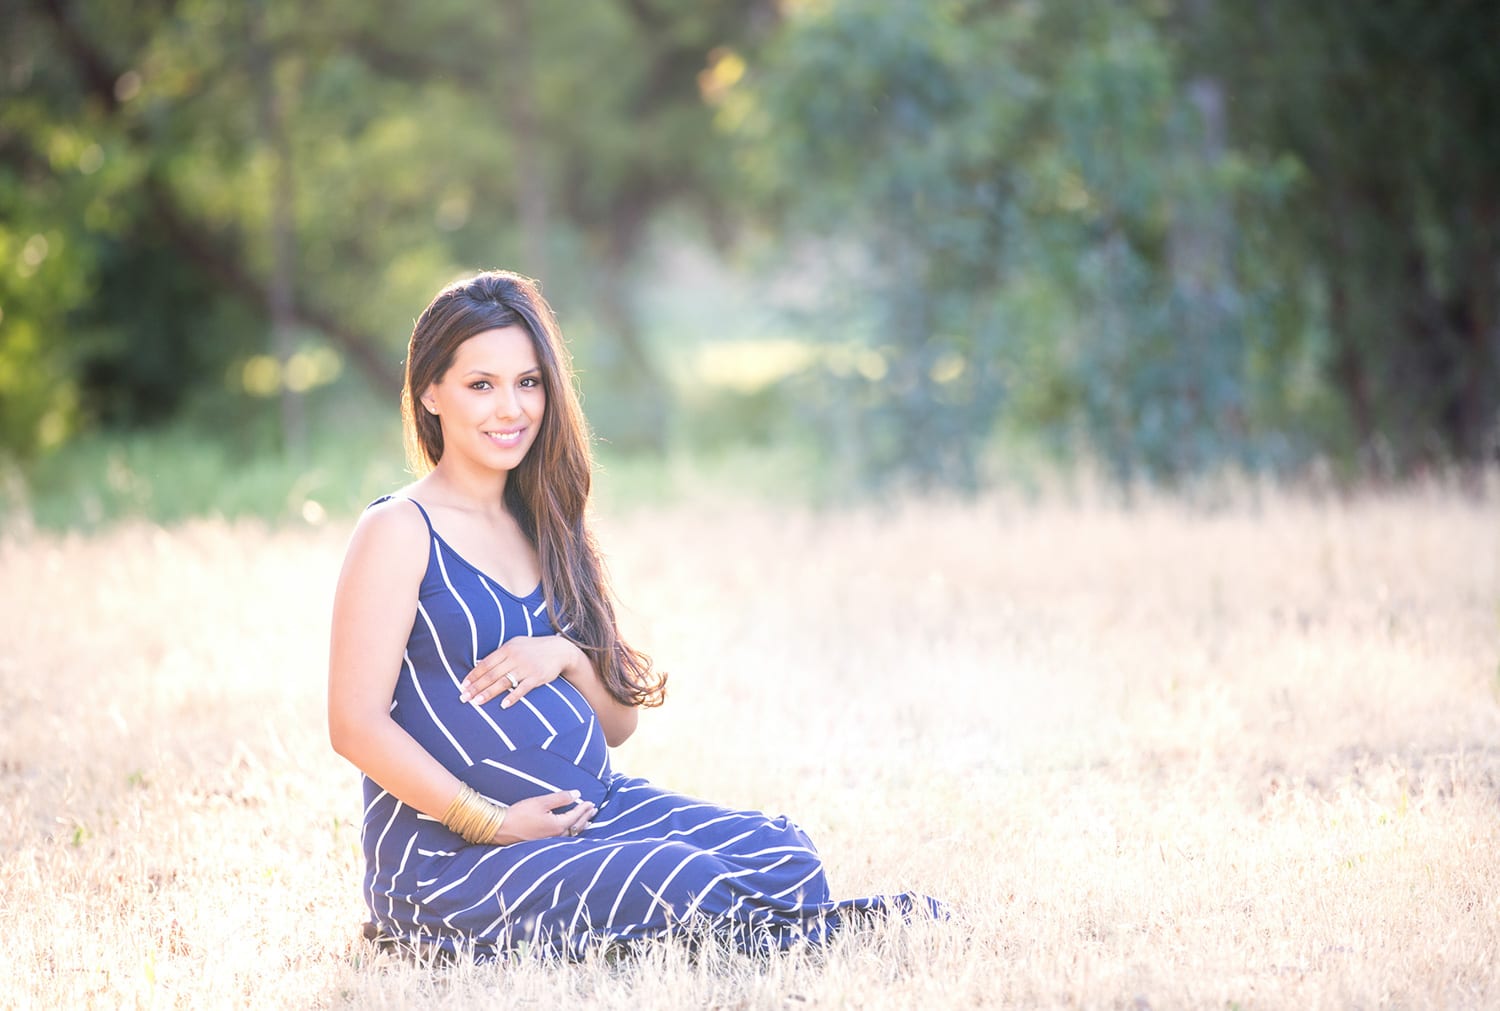 Portland_Maternity_Photographer_Gretchen_Barros_Photography_Maternity_in_Grass